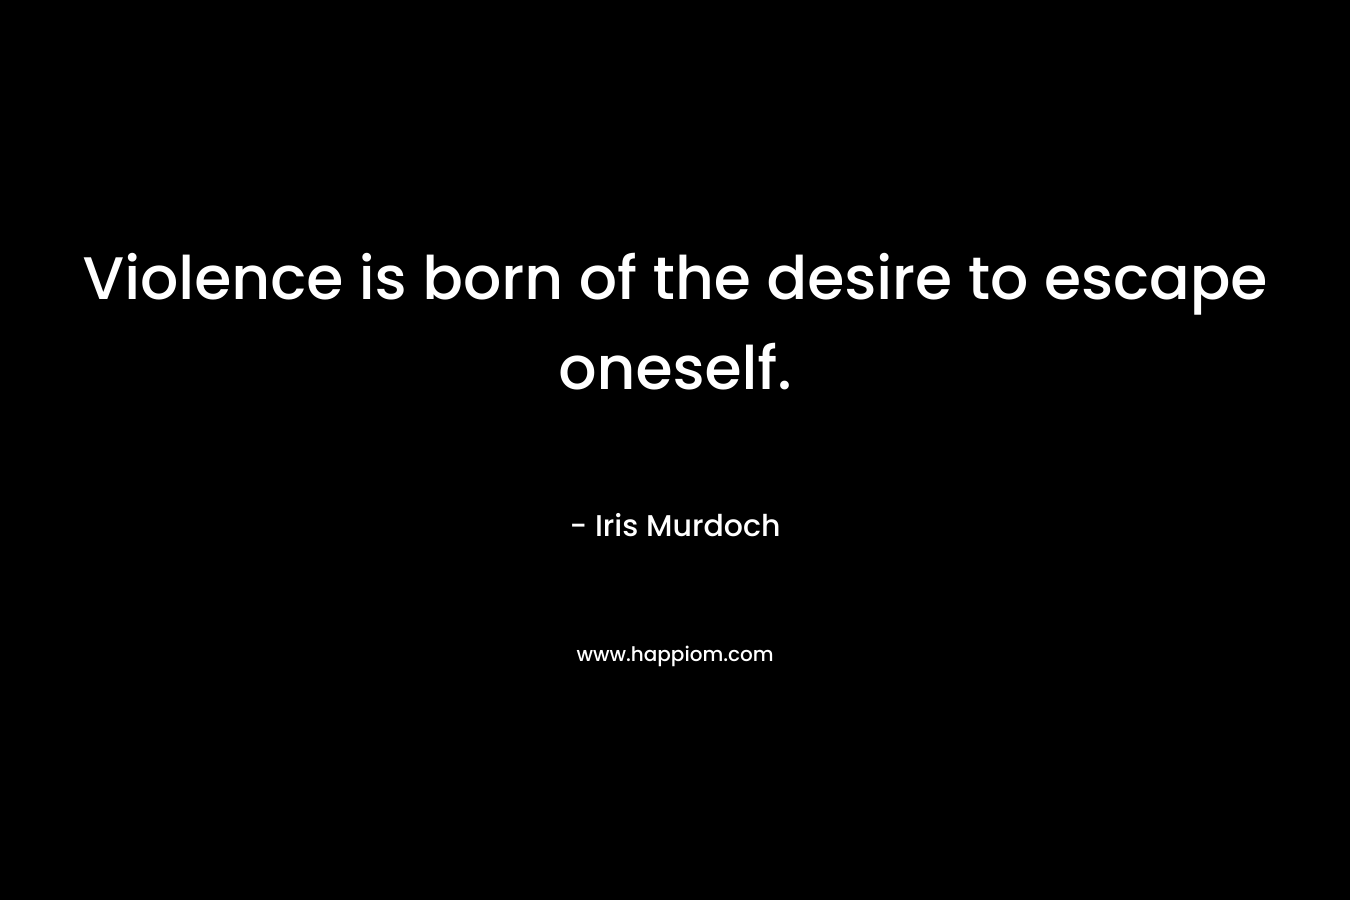 Violence is born of the desire to escape oneself. – Iris Murdoch